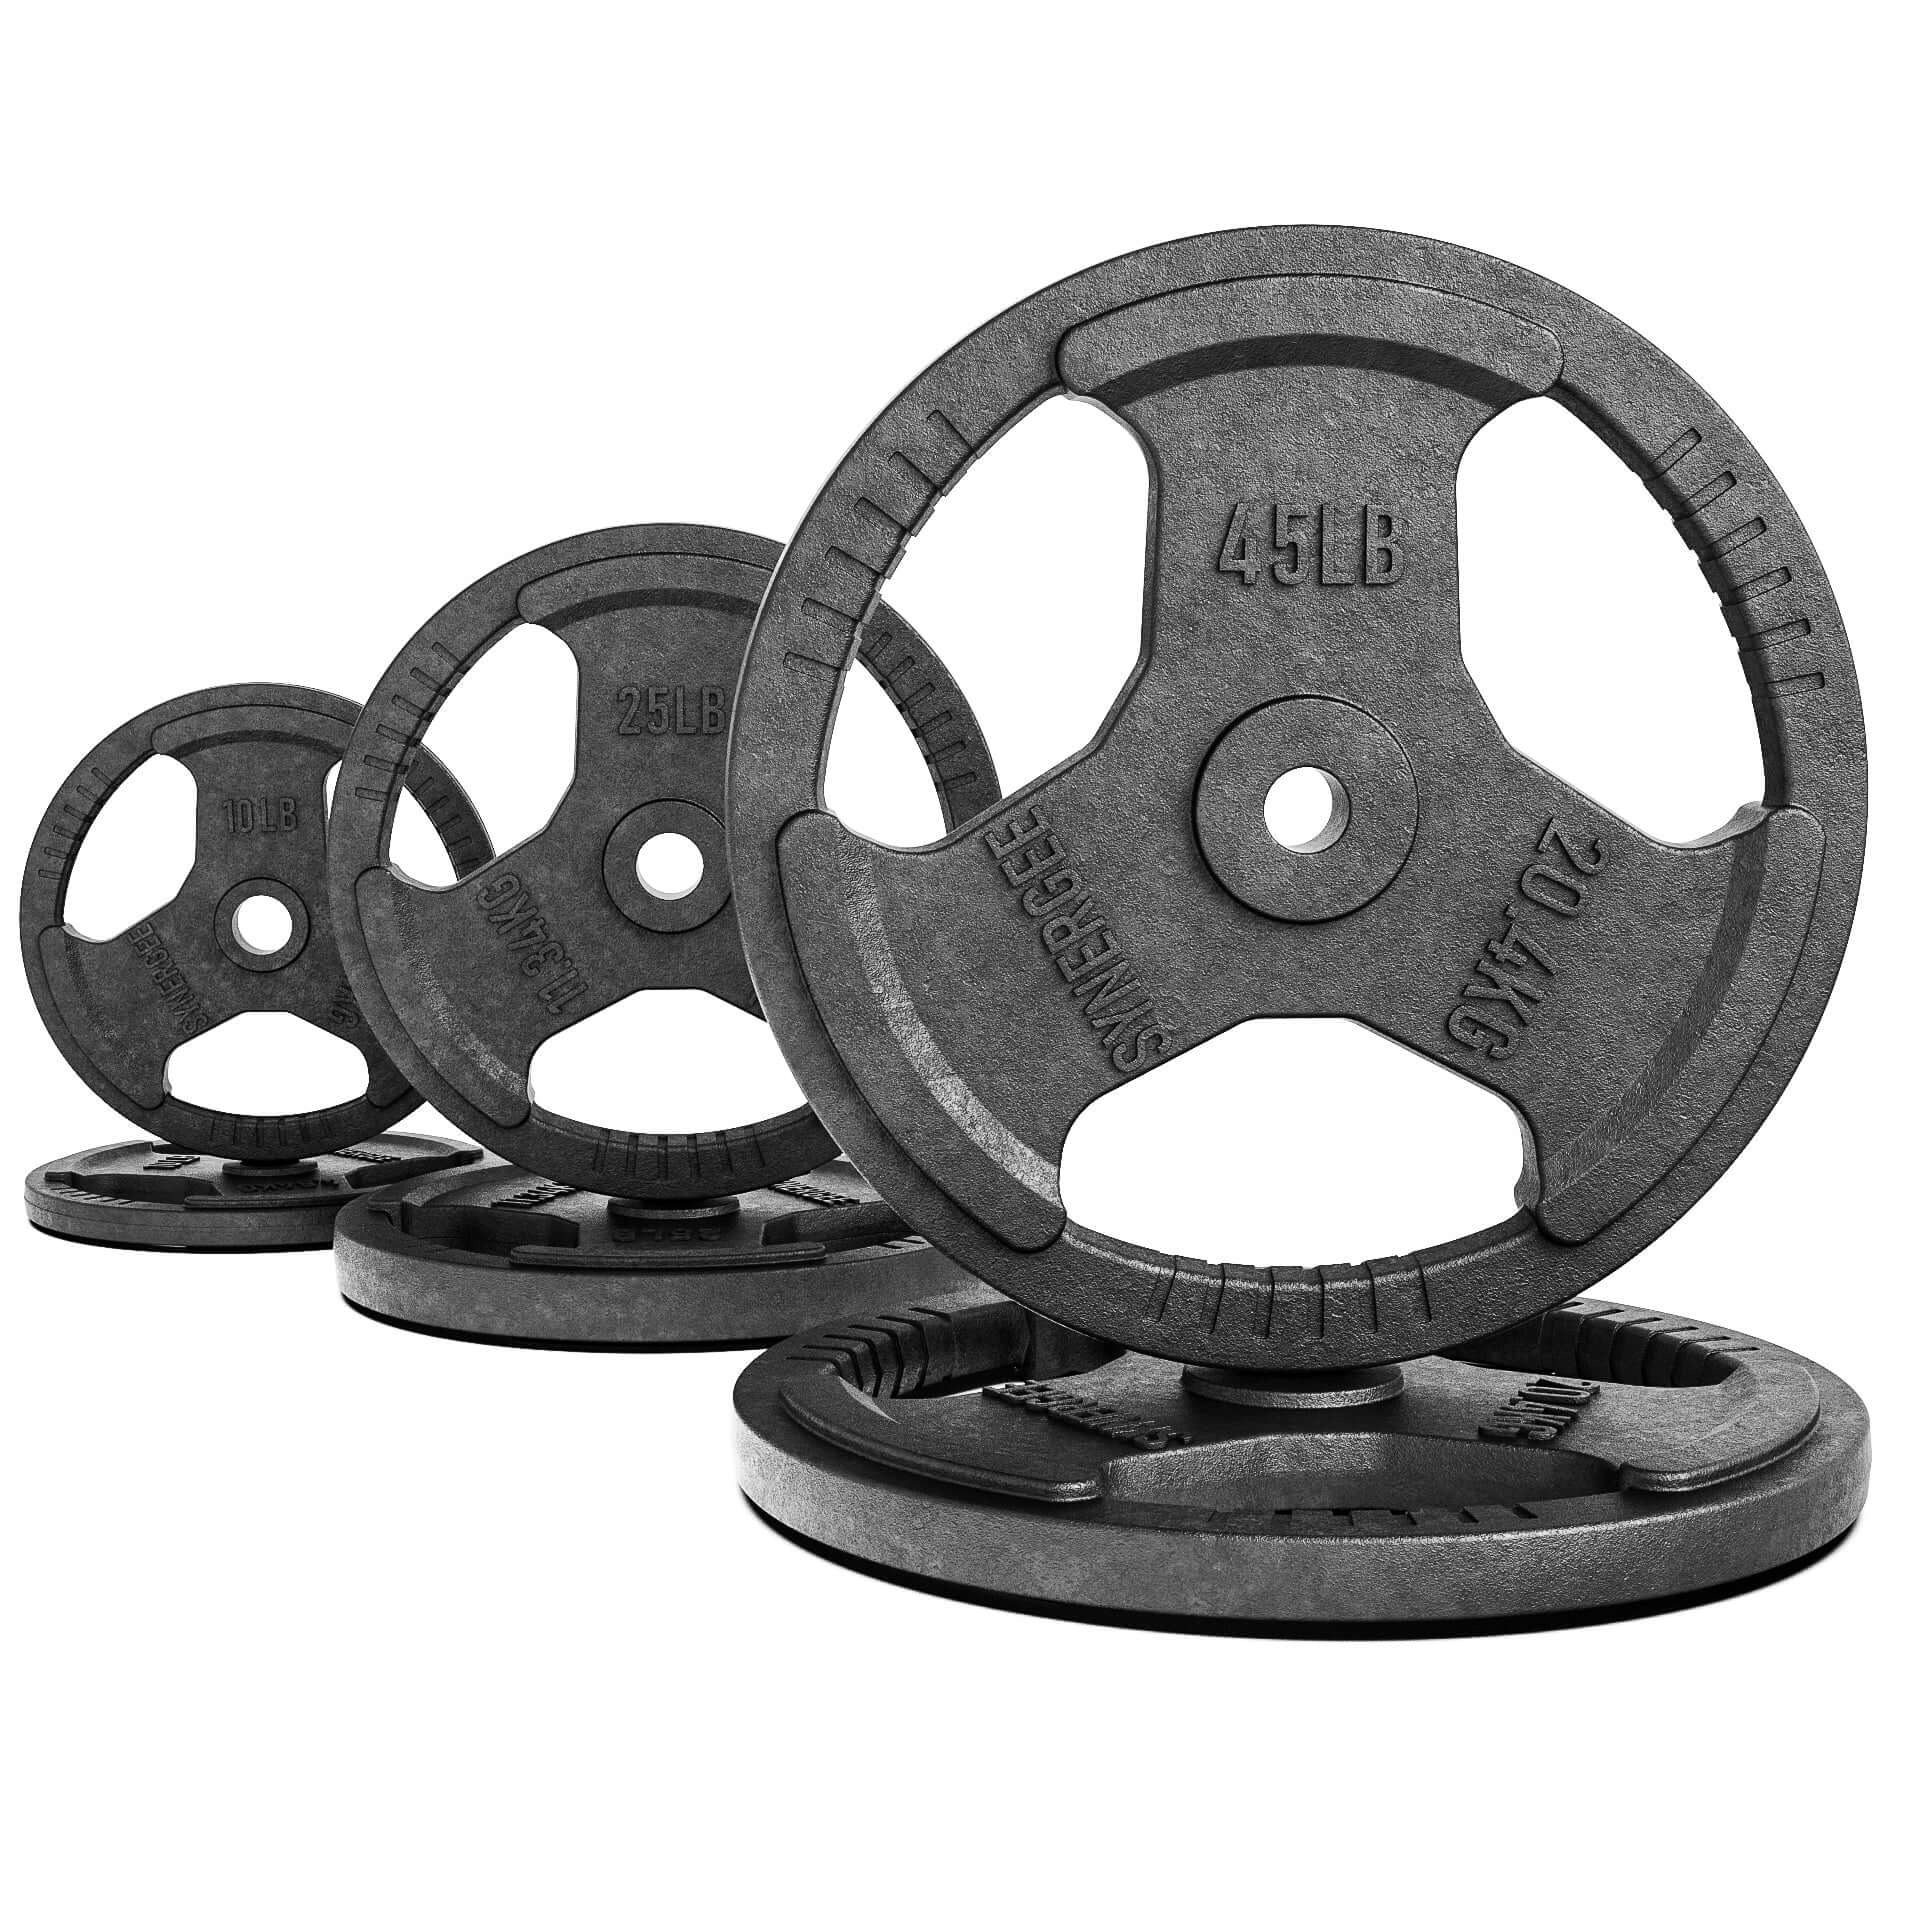 1 Inch Cast Iron Weight Plates